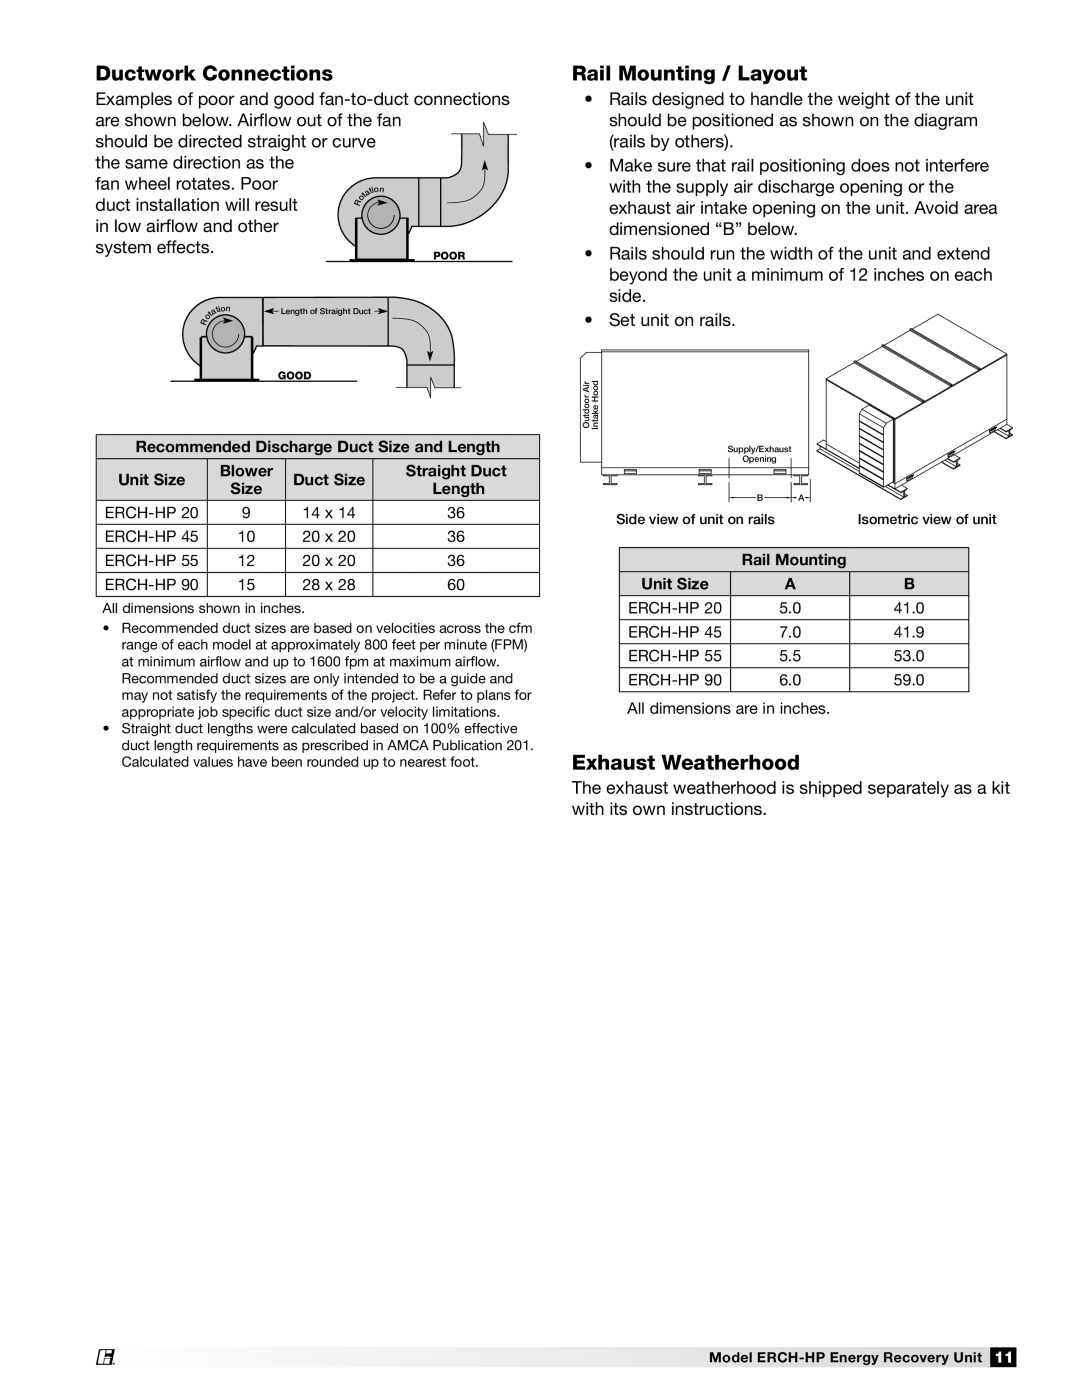 Greenheck Fan 473501 manual Ductwork Connections, Rail Mounting / Layout, Exhaust Weatherhood 